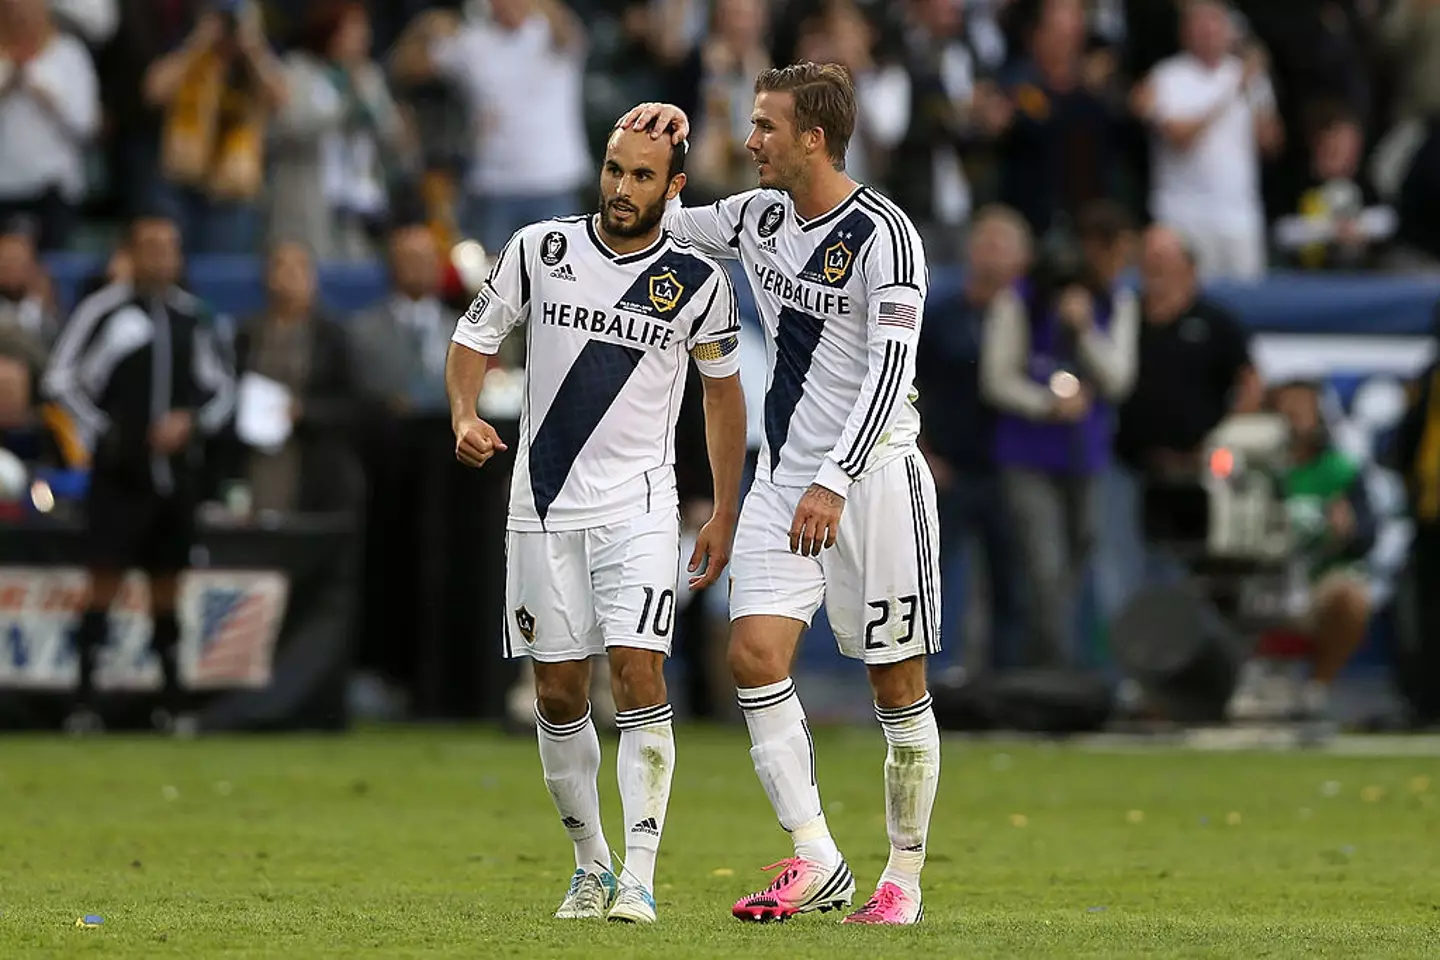 Donovan played with David Beckham for six seasons in LA. (Jeff Gross/Getty Images)